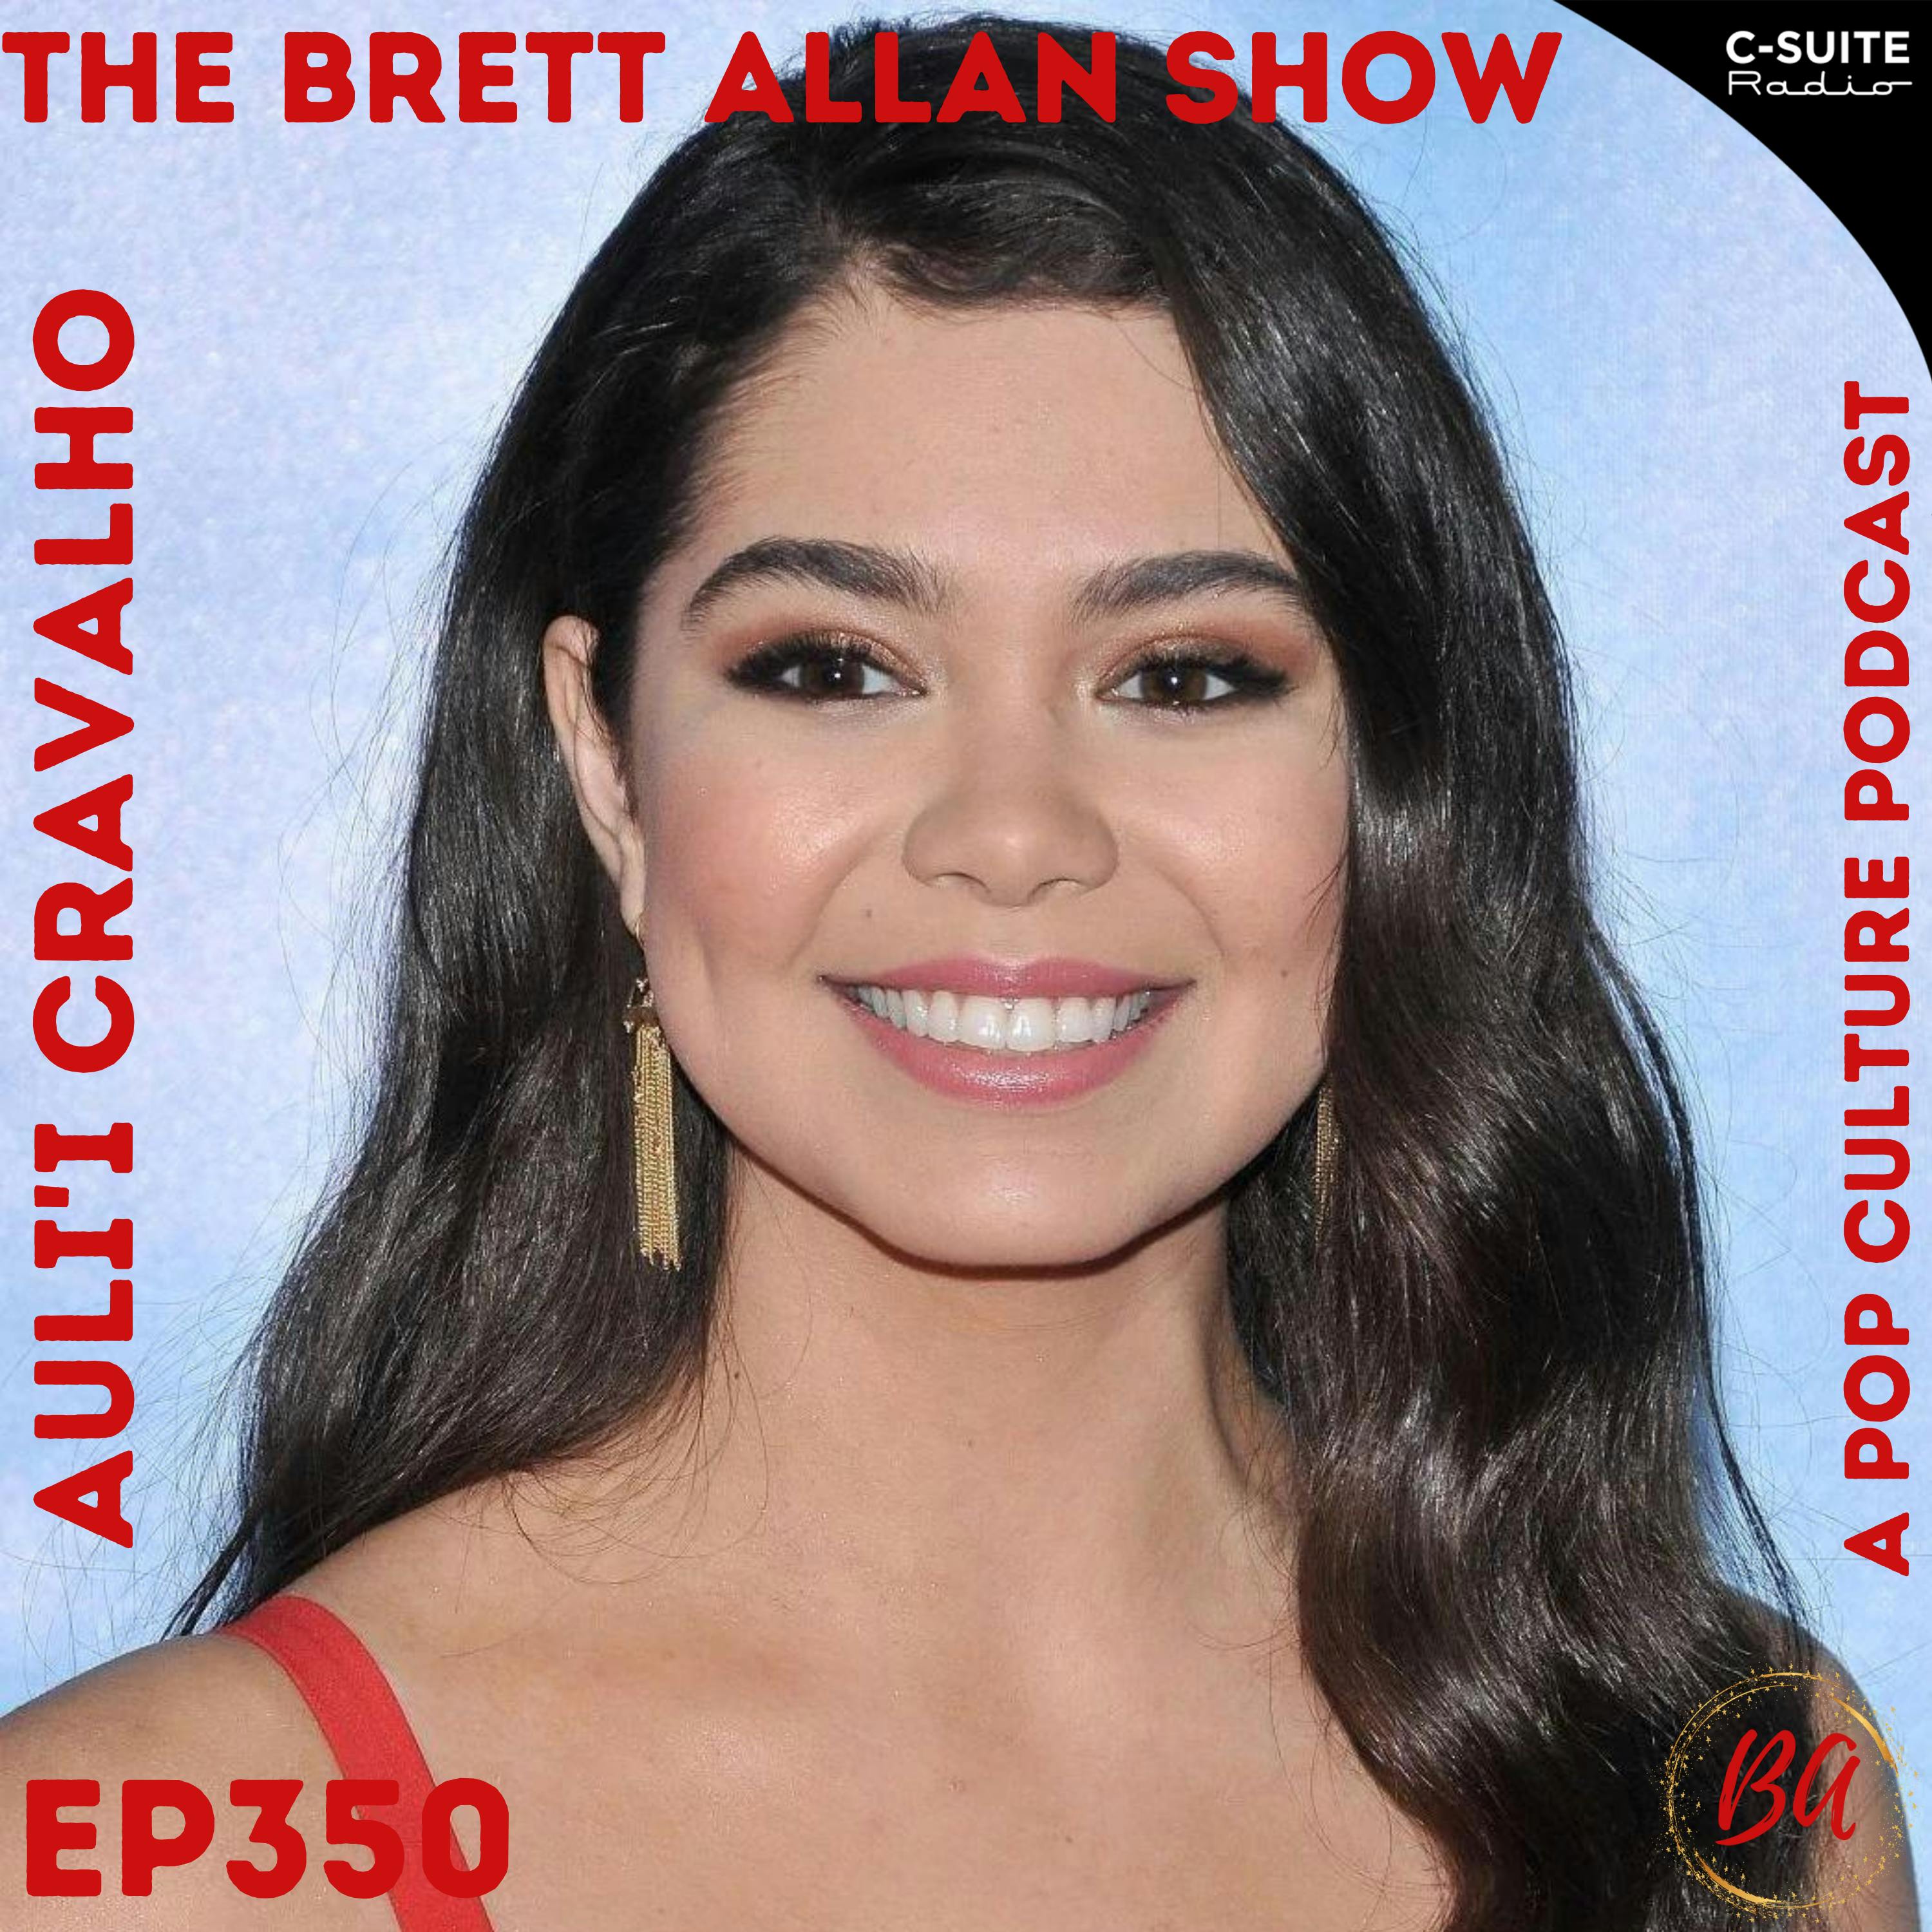 Actress Auli'i Cravalho Talks About Her Latest Film "Crush" Dropping April 29th On Hulu | WATCH NOW! Image